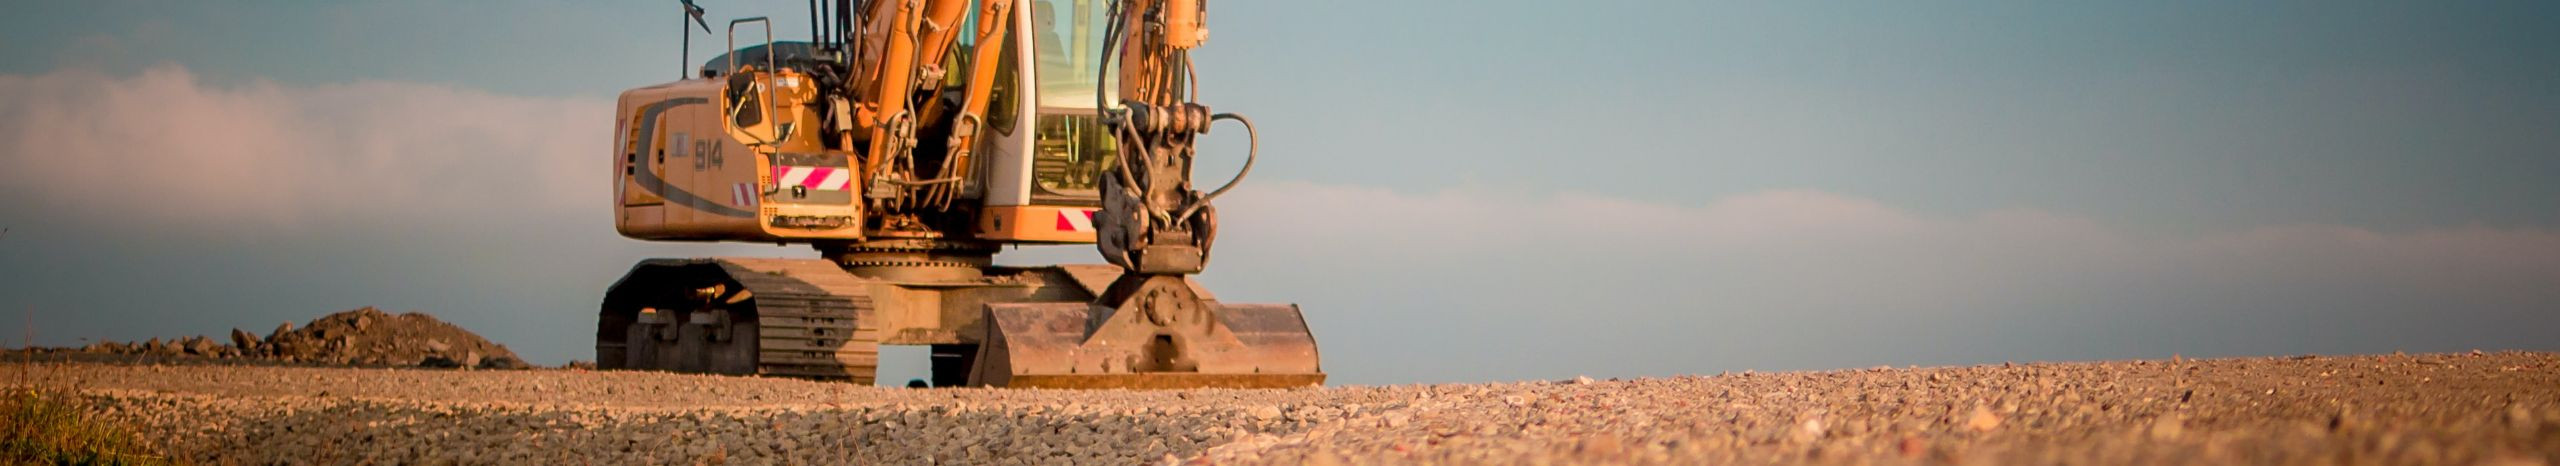 Service, Construction and demolition works, Drainage systems, foundation excavation, Digging cable ditches, Insurance of inclines, Room excavator services, Preparation of agricultural areas, land excavation, soil leveling